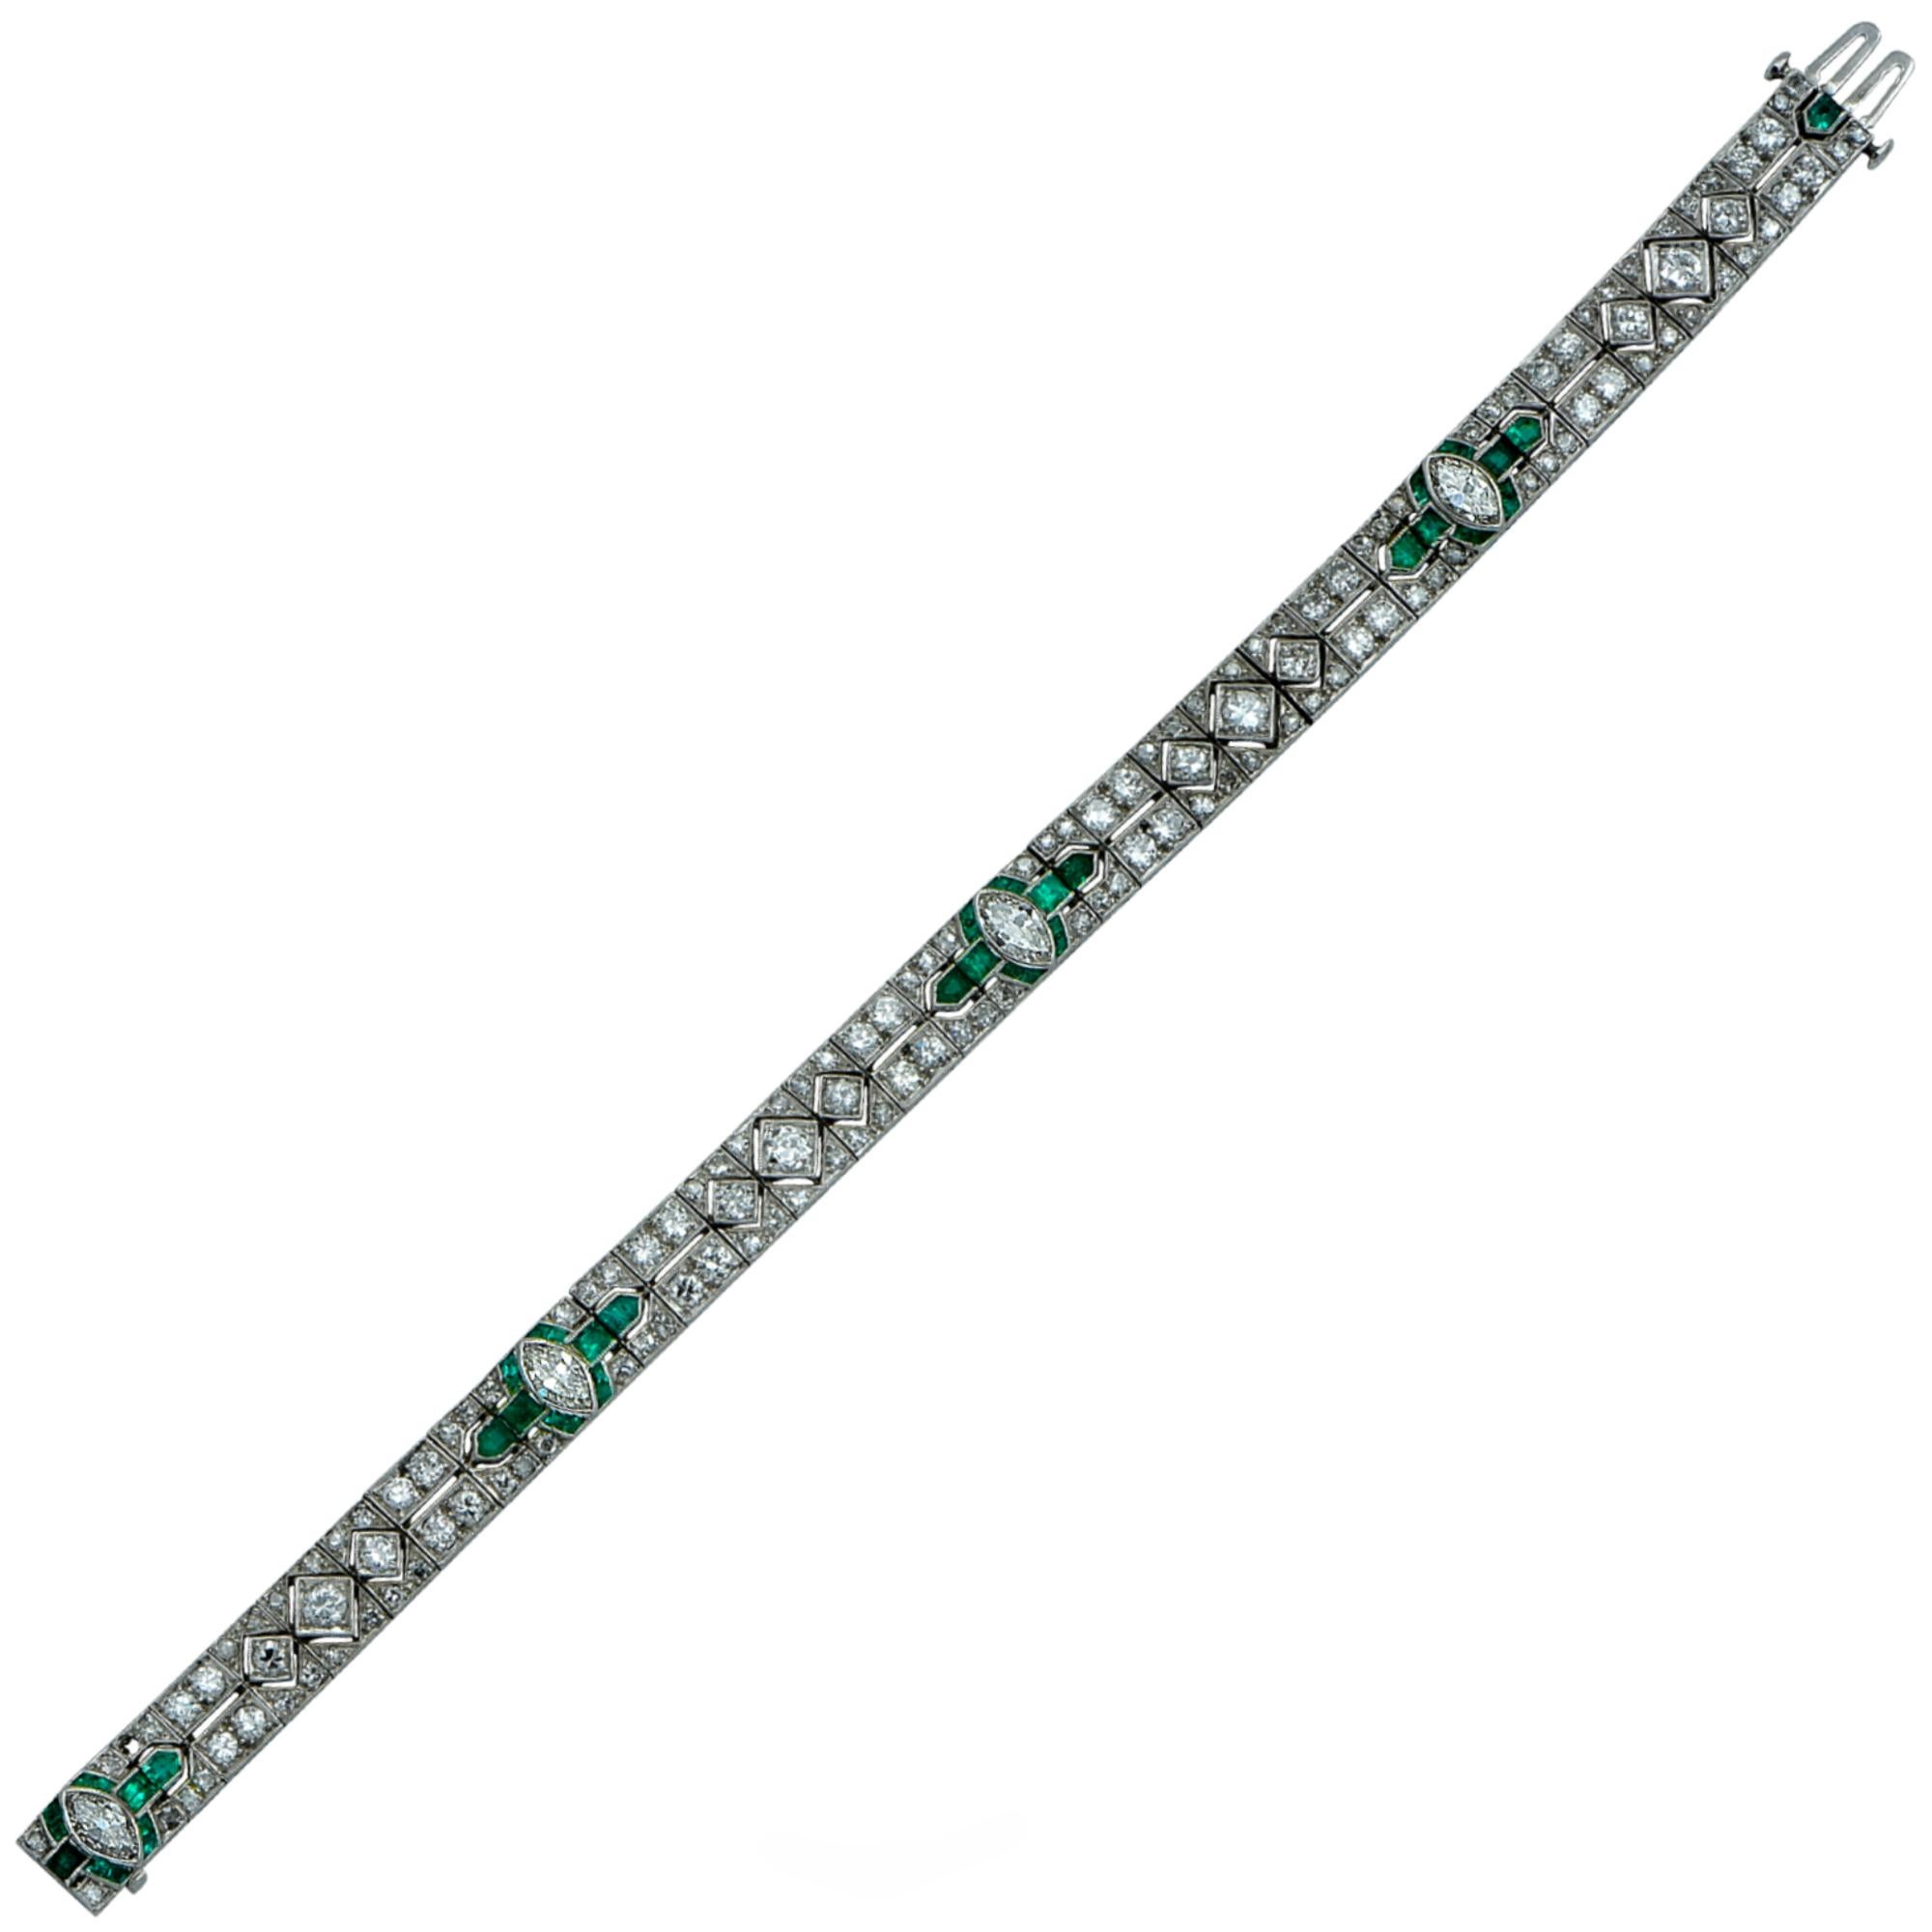 Platinum art deco bracelet featuring 4 marquise cut diamonds weighing approximately 1.6cts and 104 old European, transitional and single cut diamonds weighing approximately 3.9 carats total I-J color VS clarity. The bracelet measures 7.25 inches in